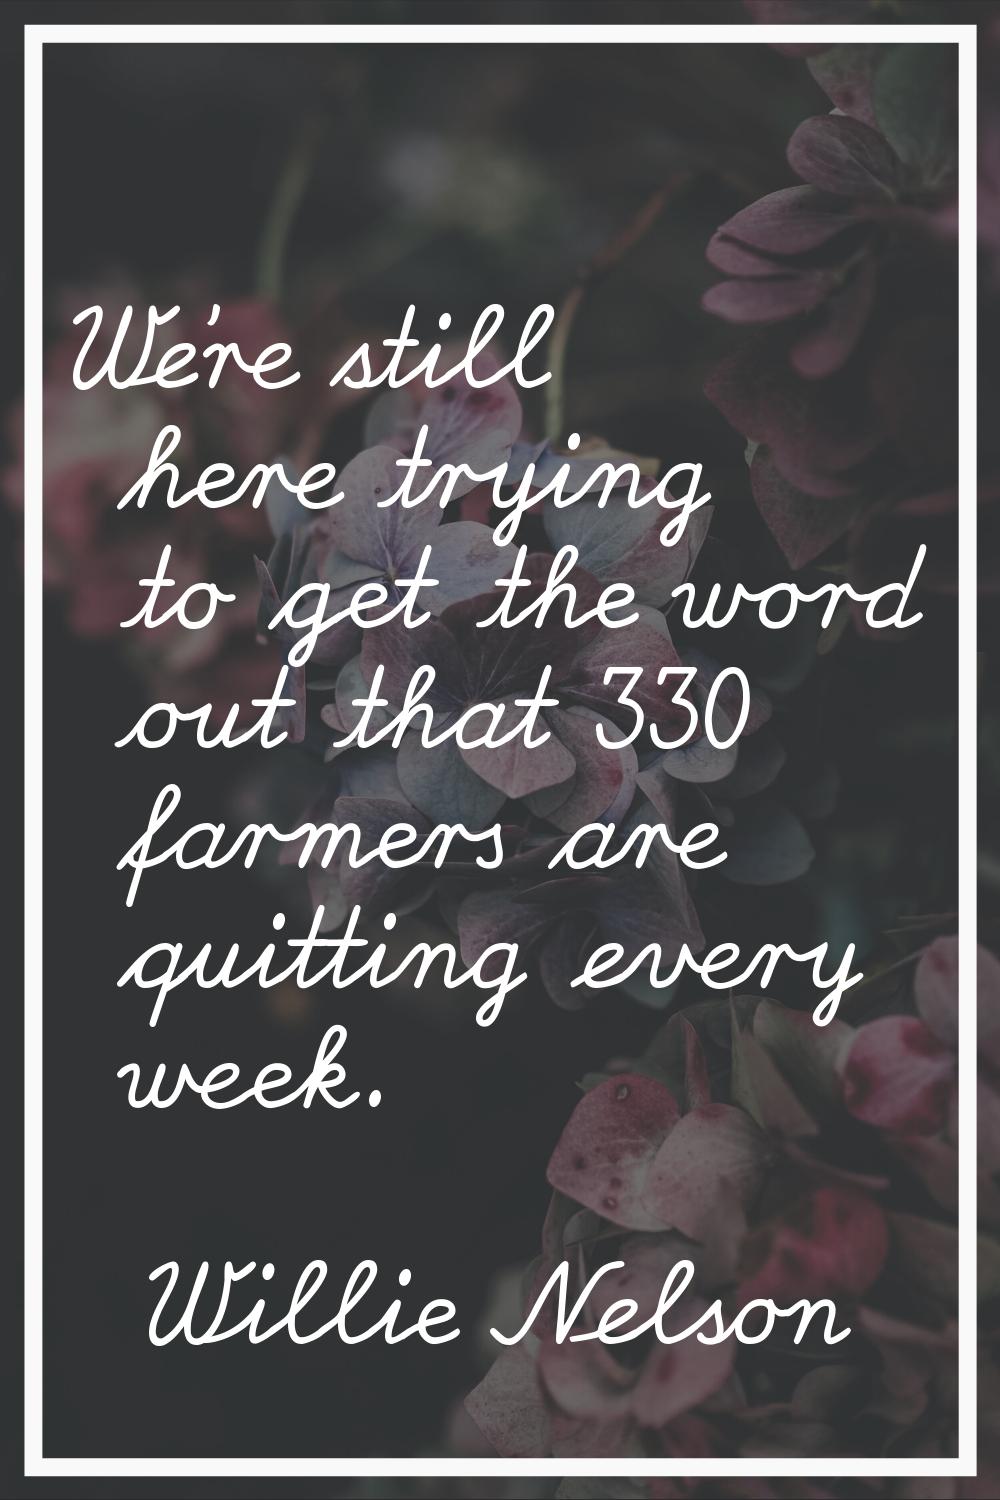 We're still here trying to get the word out that 330 farmers are quitting every week.